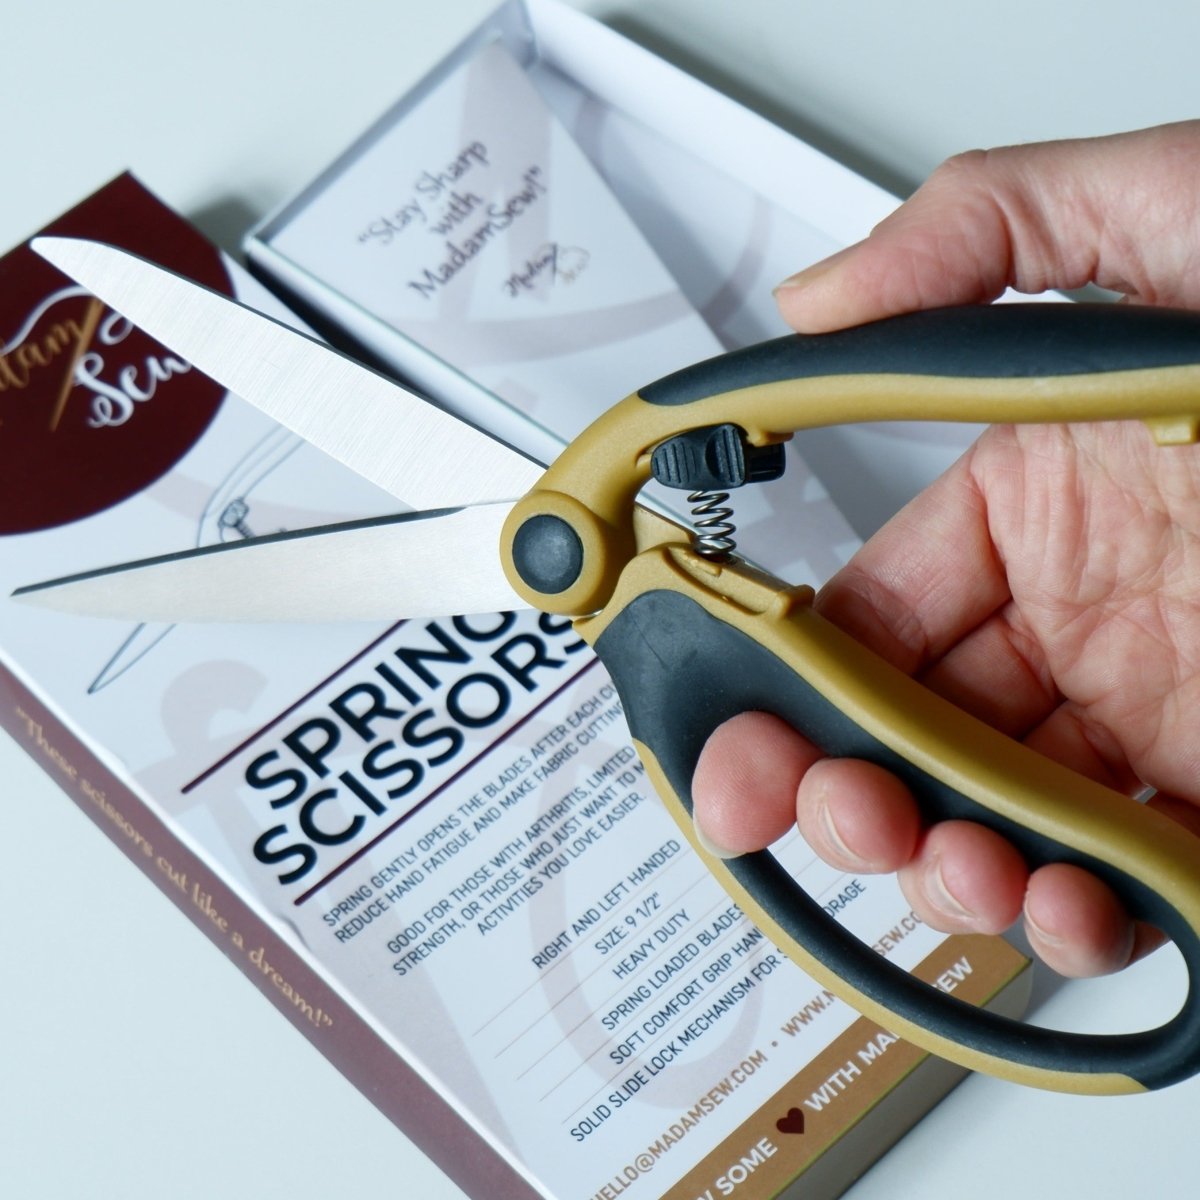 A hand showing the Madam Sew spring scissors in the open position with the packaging in the back